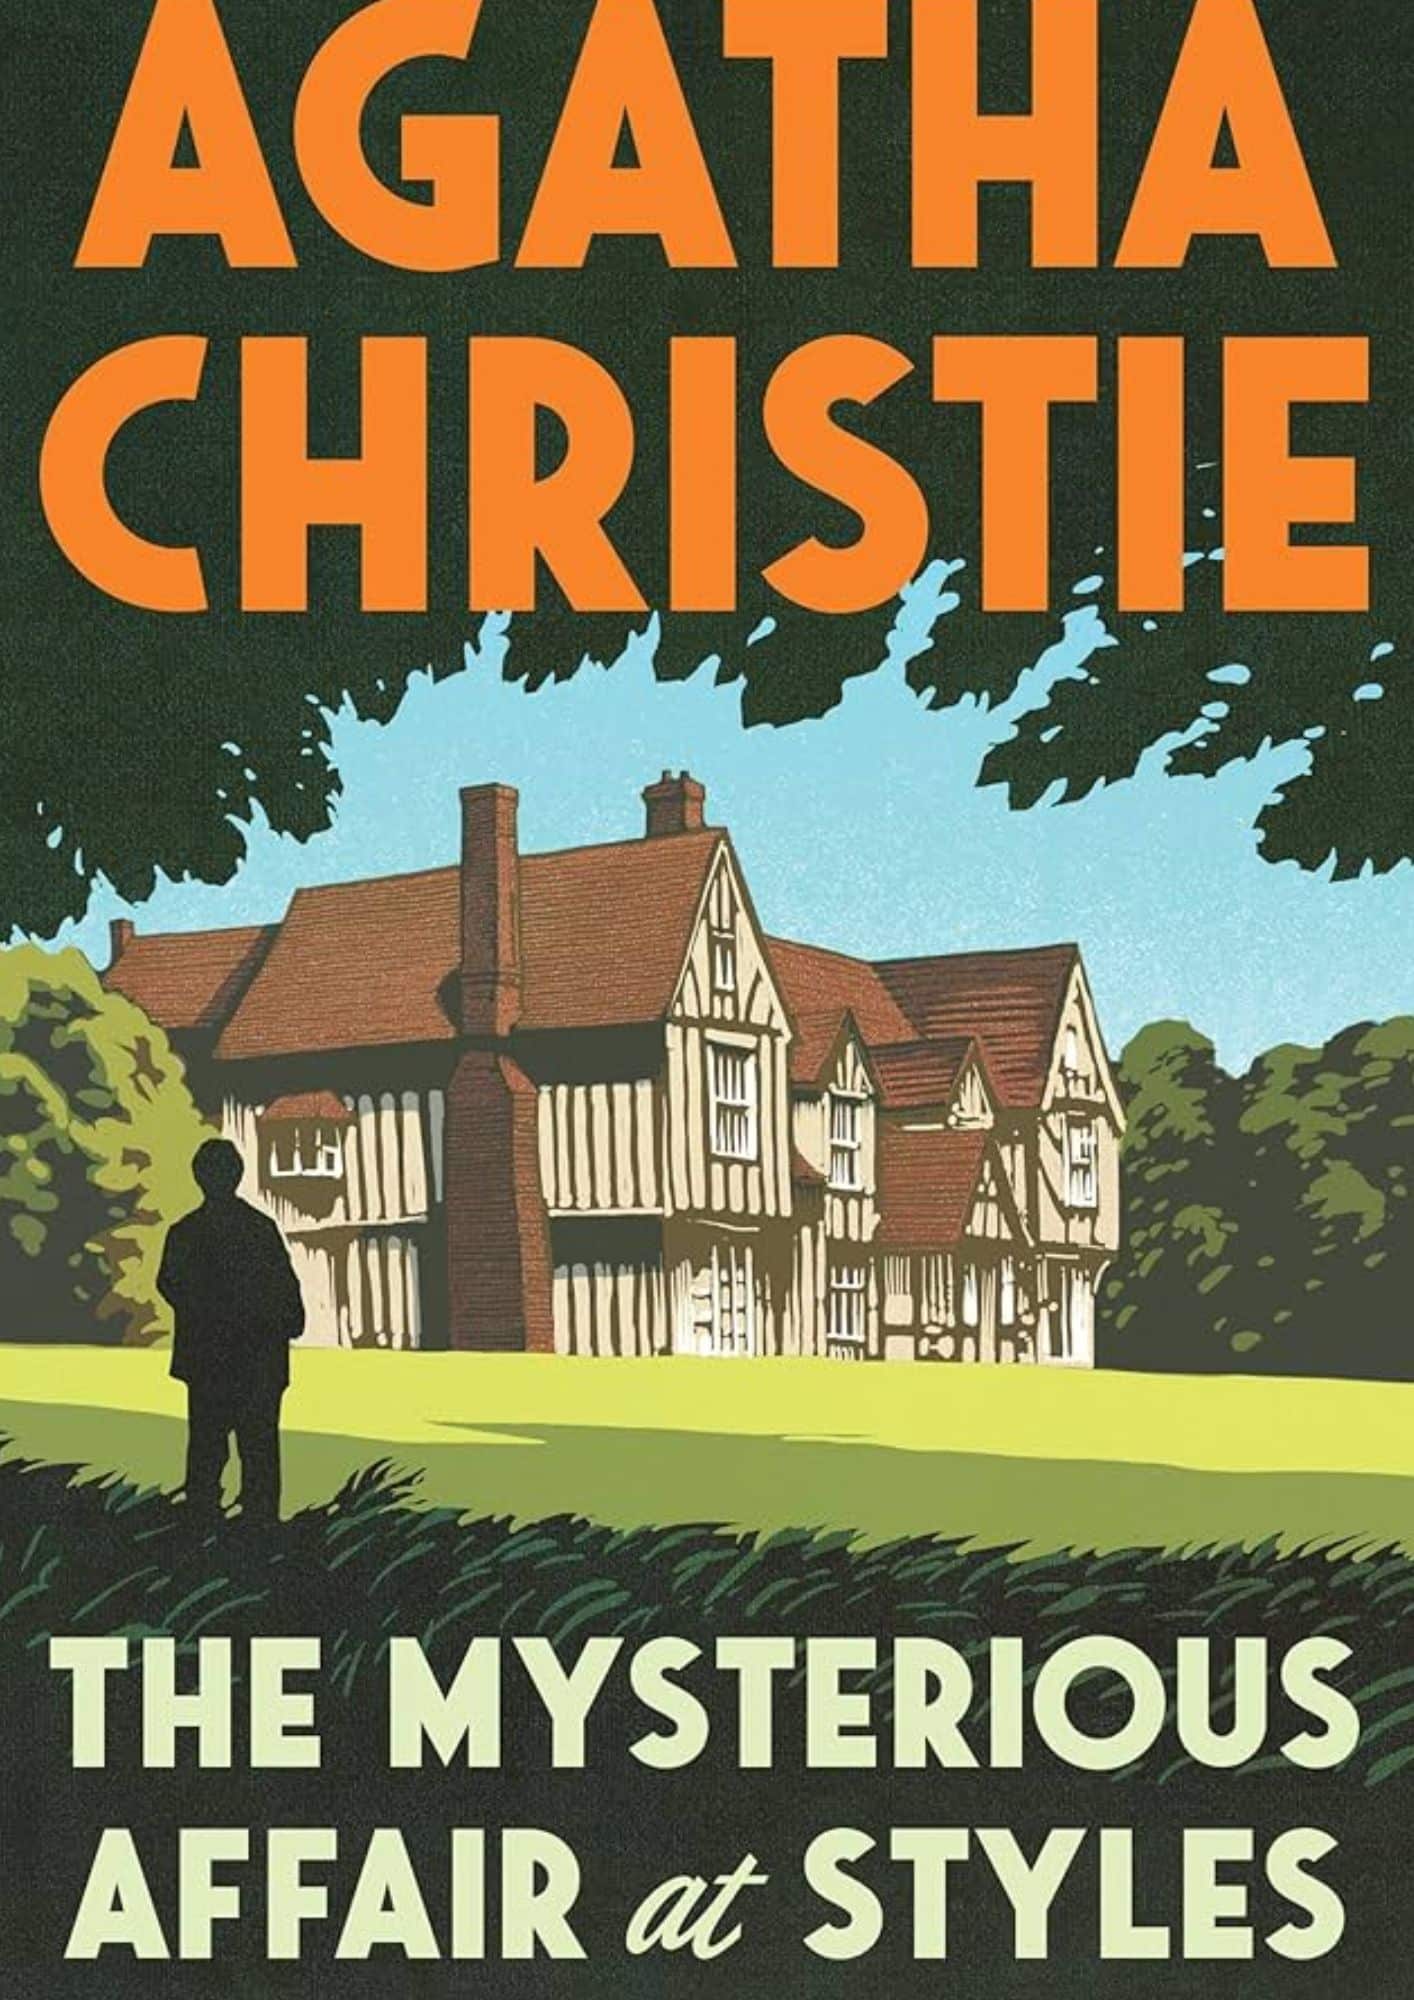 10 Must-Read Novels by Agatha Christie - "The Mysterious Affair at Styles" (1920)